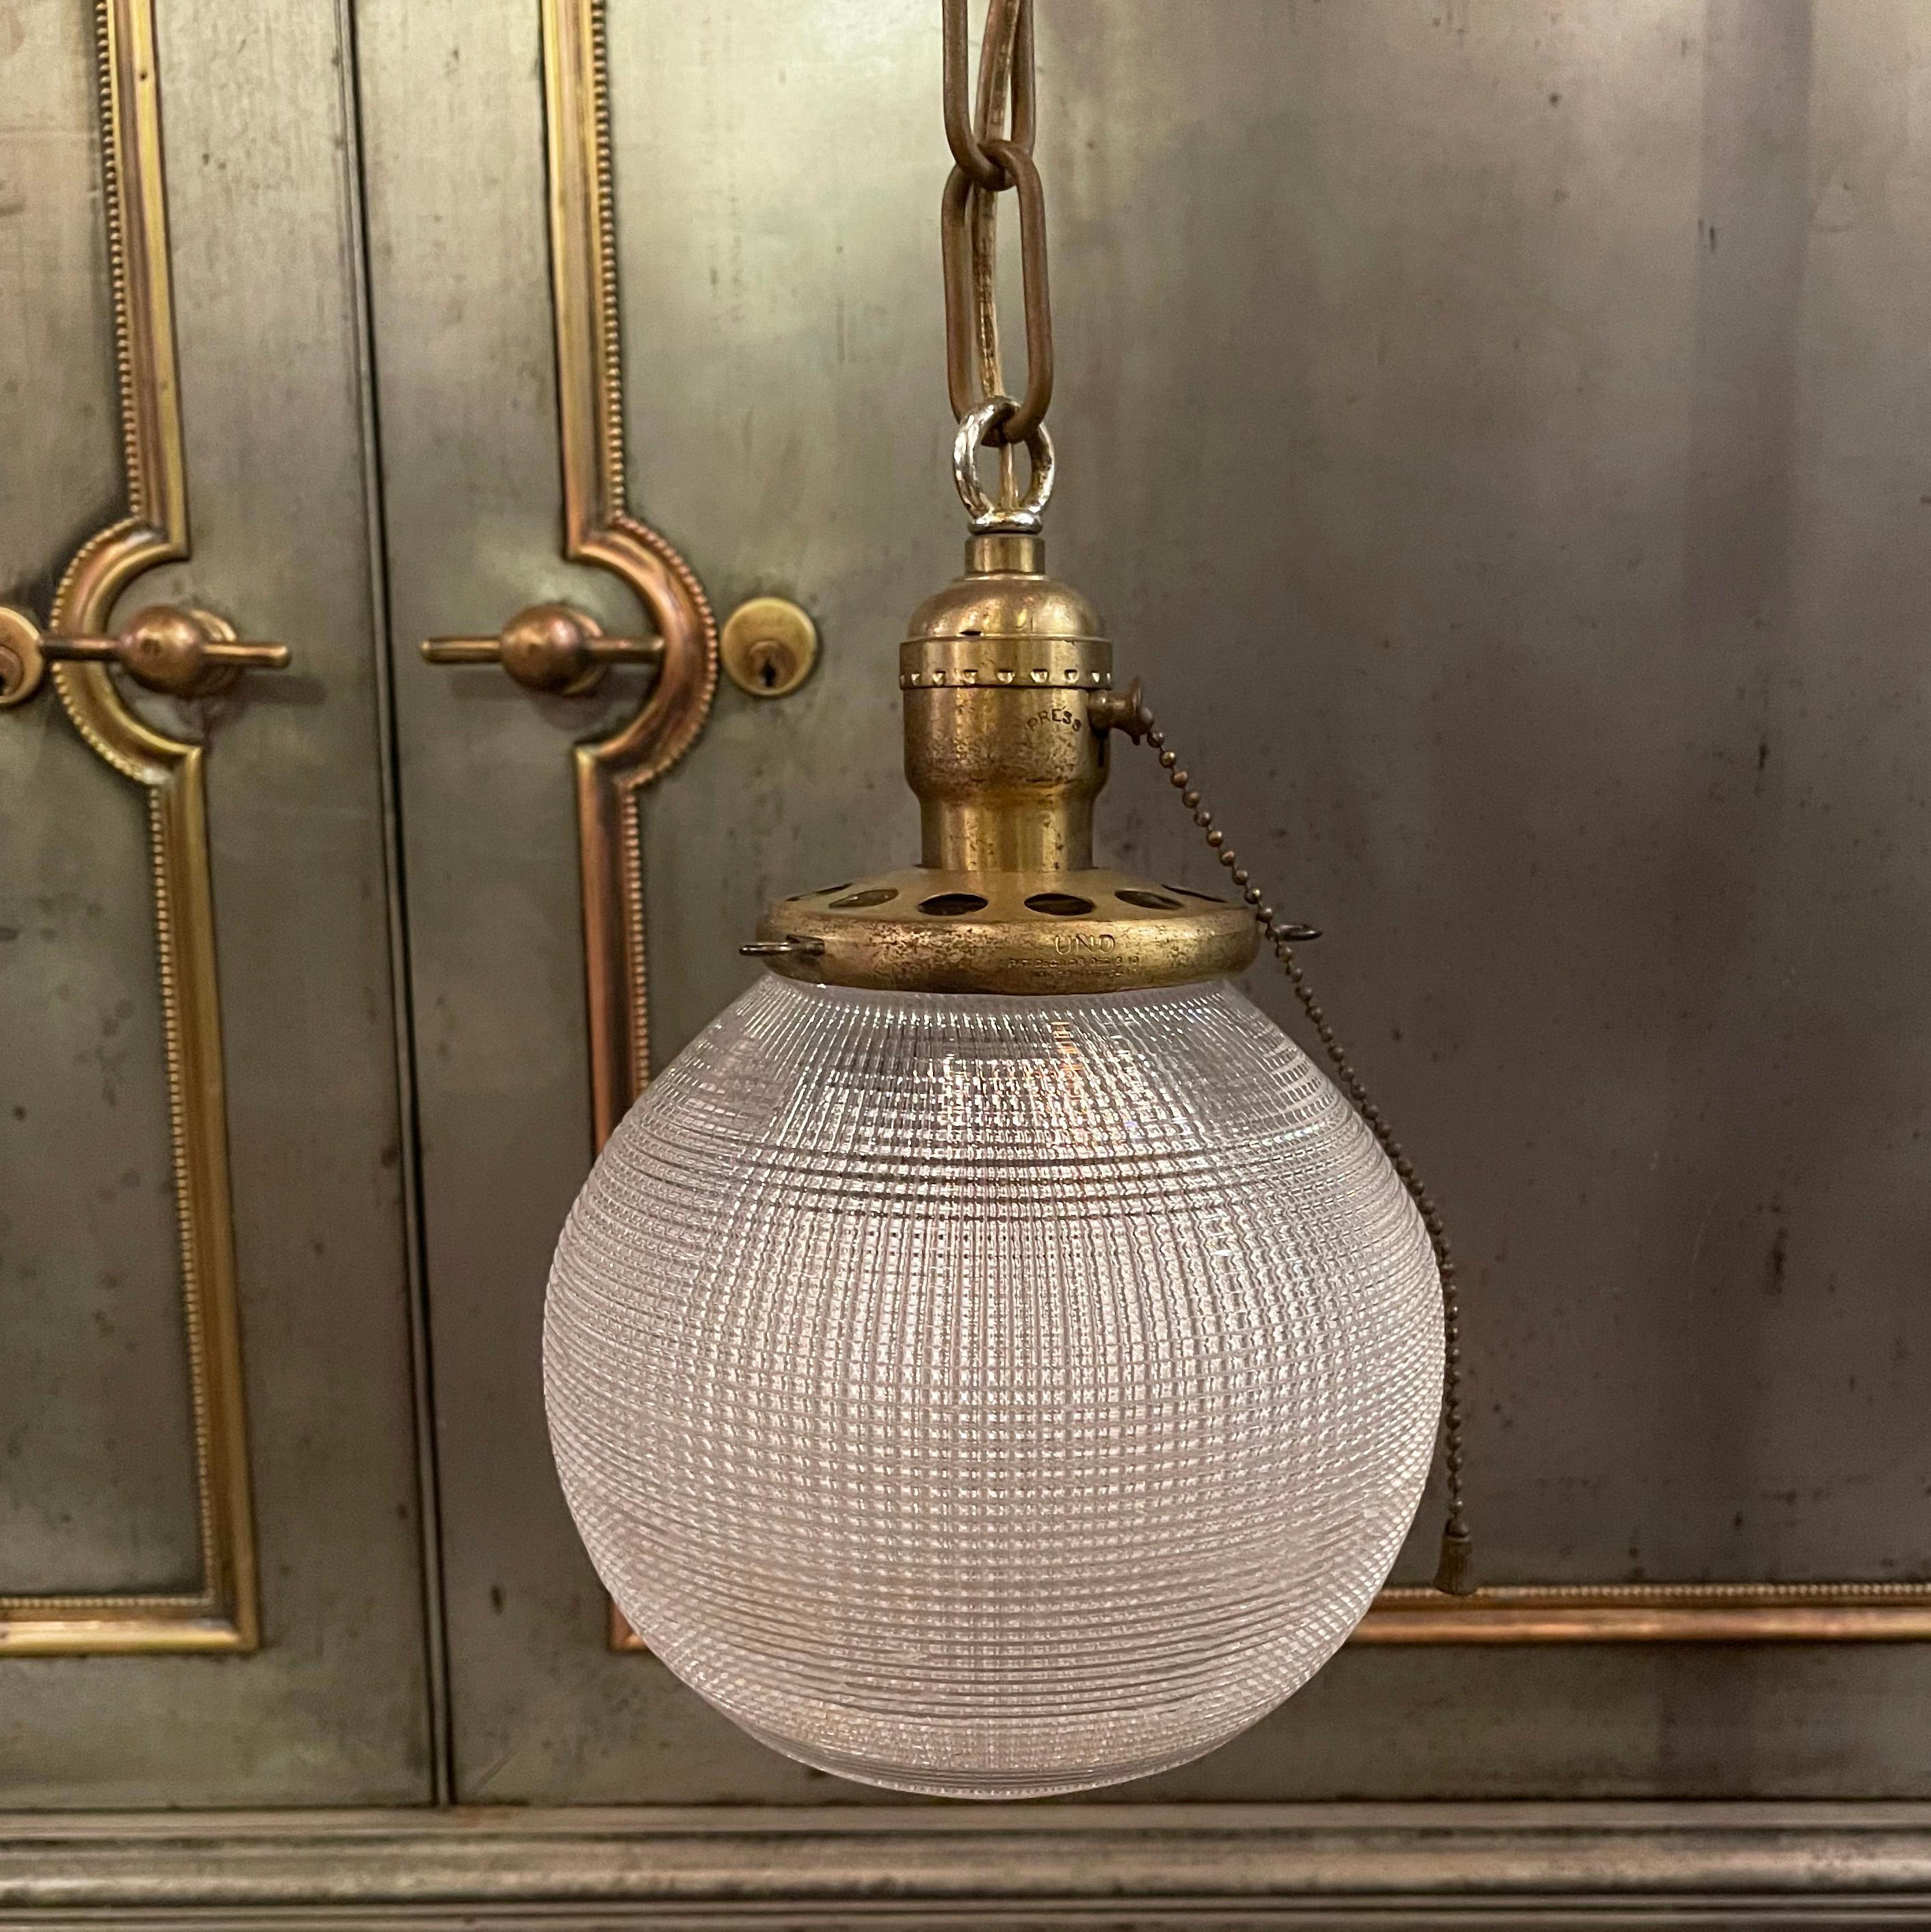 Early 20th century, industrial pendant light with a prismatic Holophane glass globe shade and brass pull chain fitter, chain link and canopy is newly wired to hang at an overall height of 25 inches.